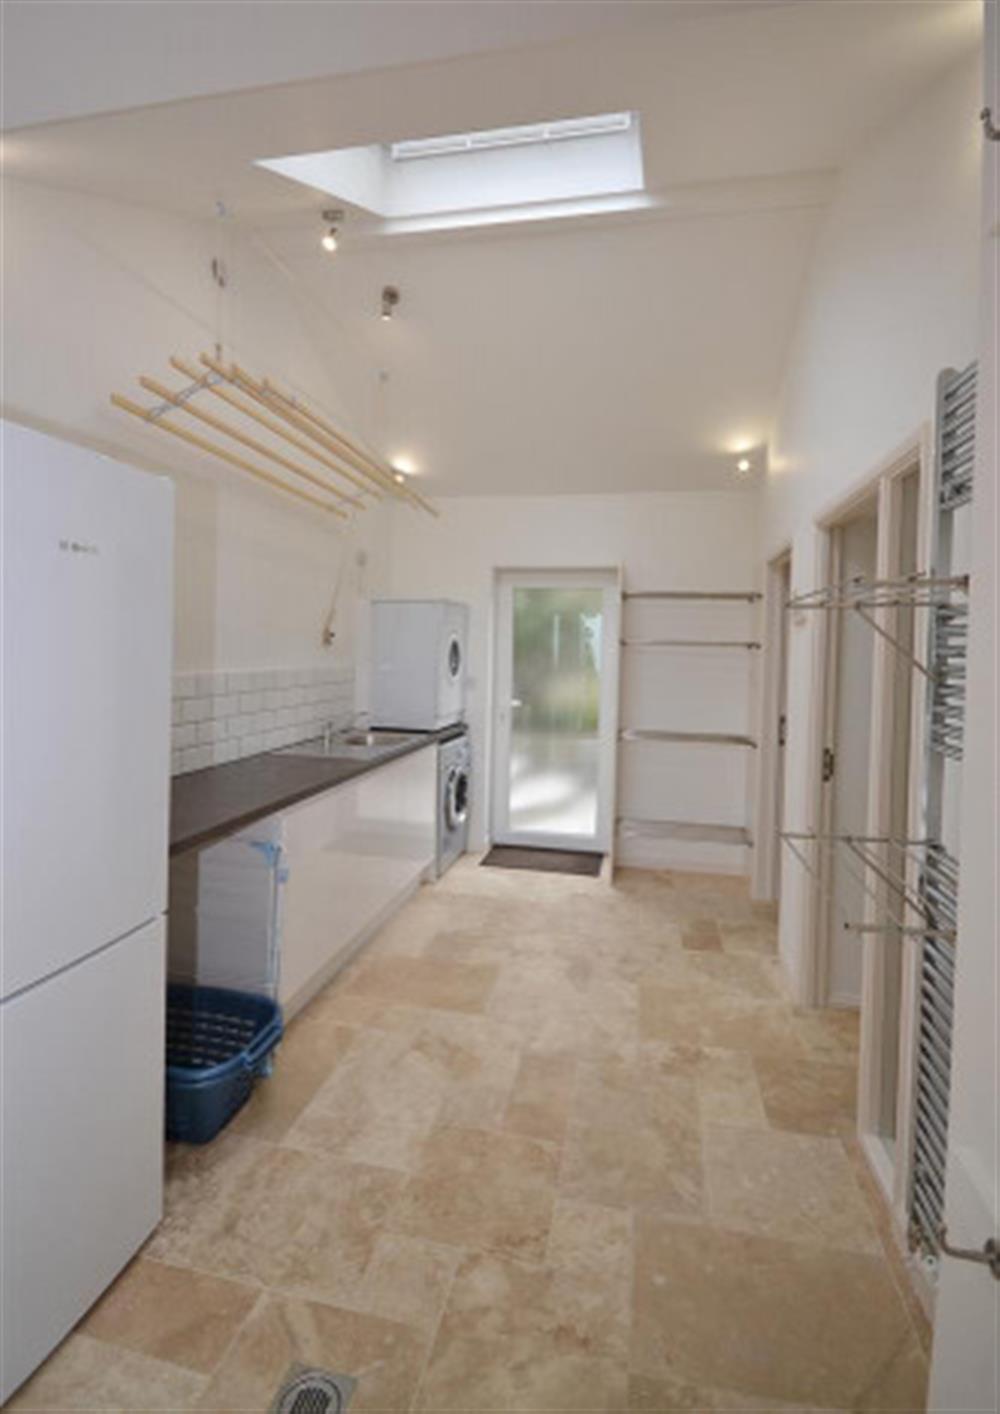 The fabulous utility room at Fiferail in Thurlestone